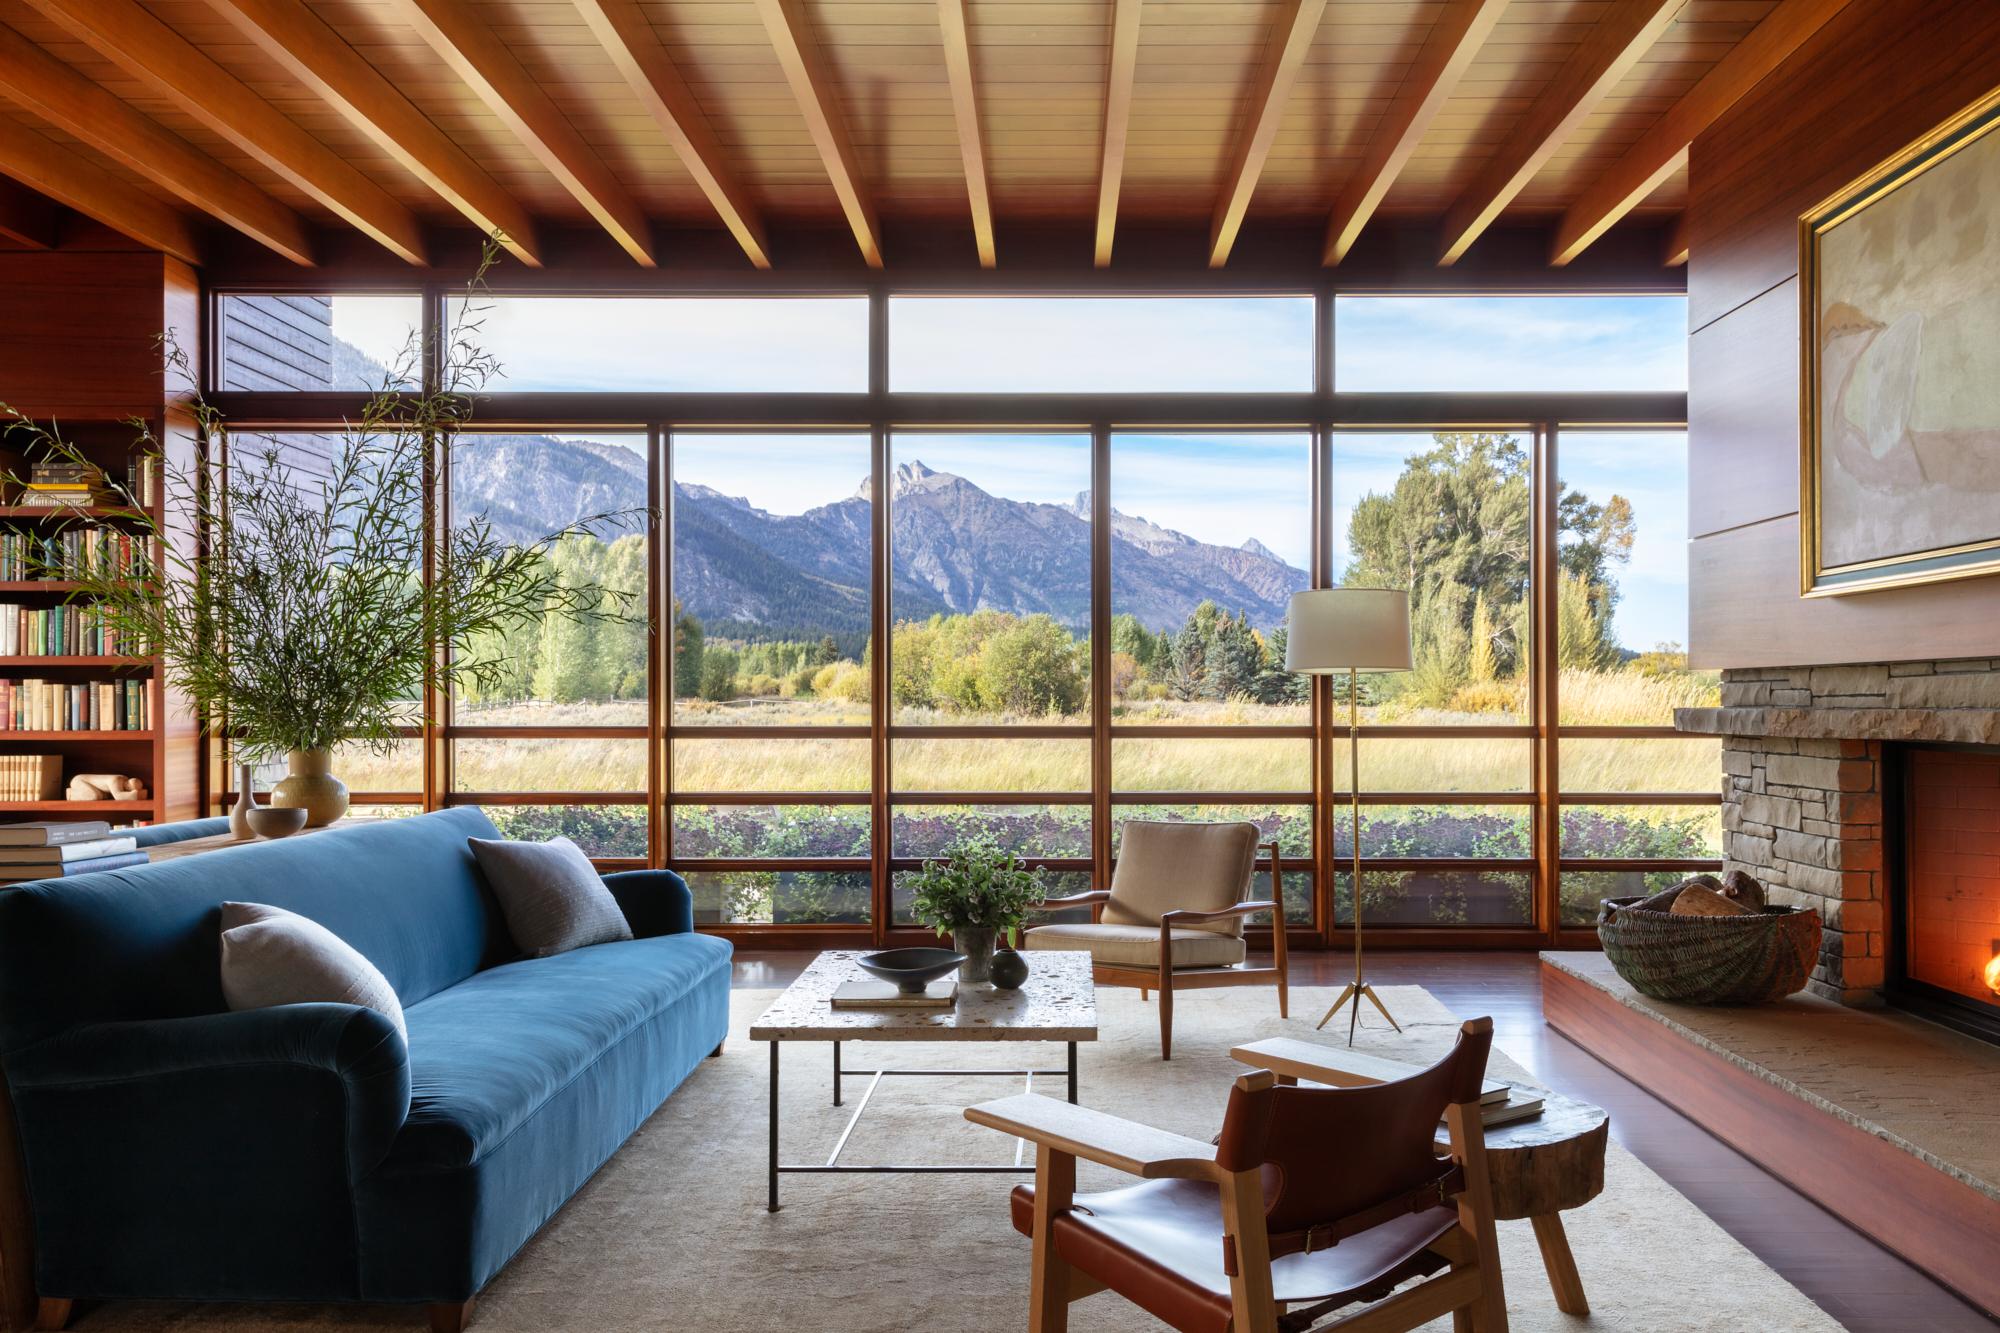 The Great Room in Celeste Robbins's "Home On The Ranch" project near Jackson Hole, Wyoming blends ranch vernacular with a modernist architectural lexicon - Effect Magazine